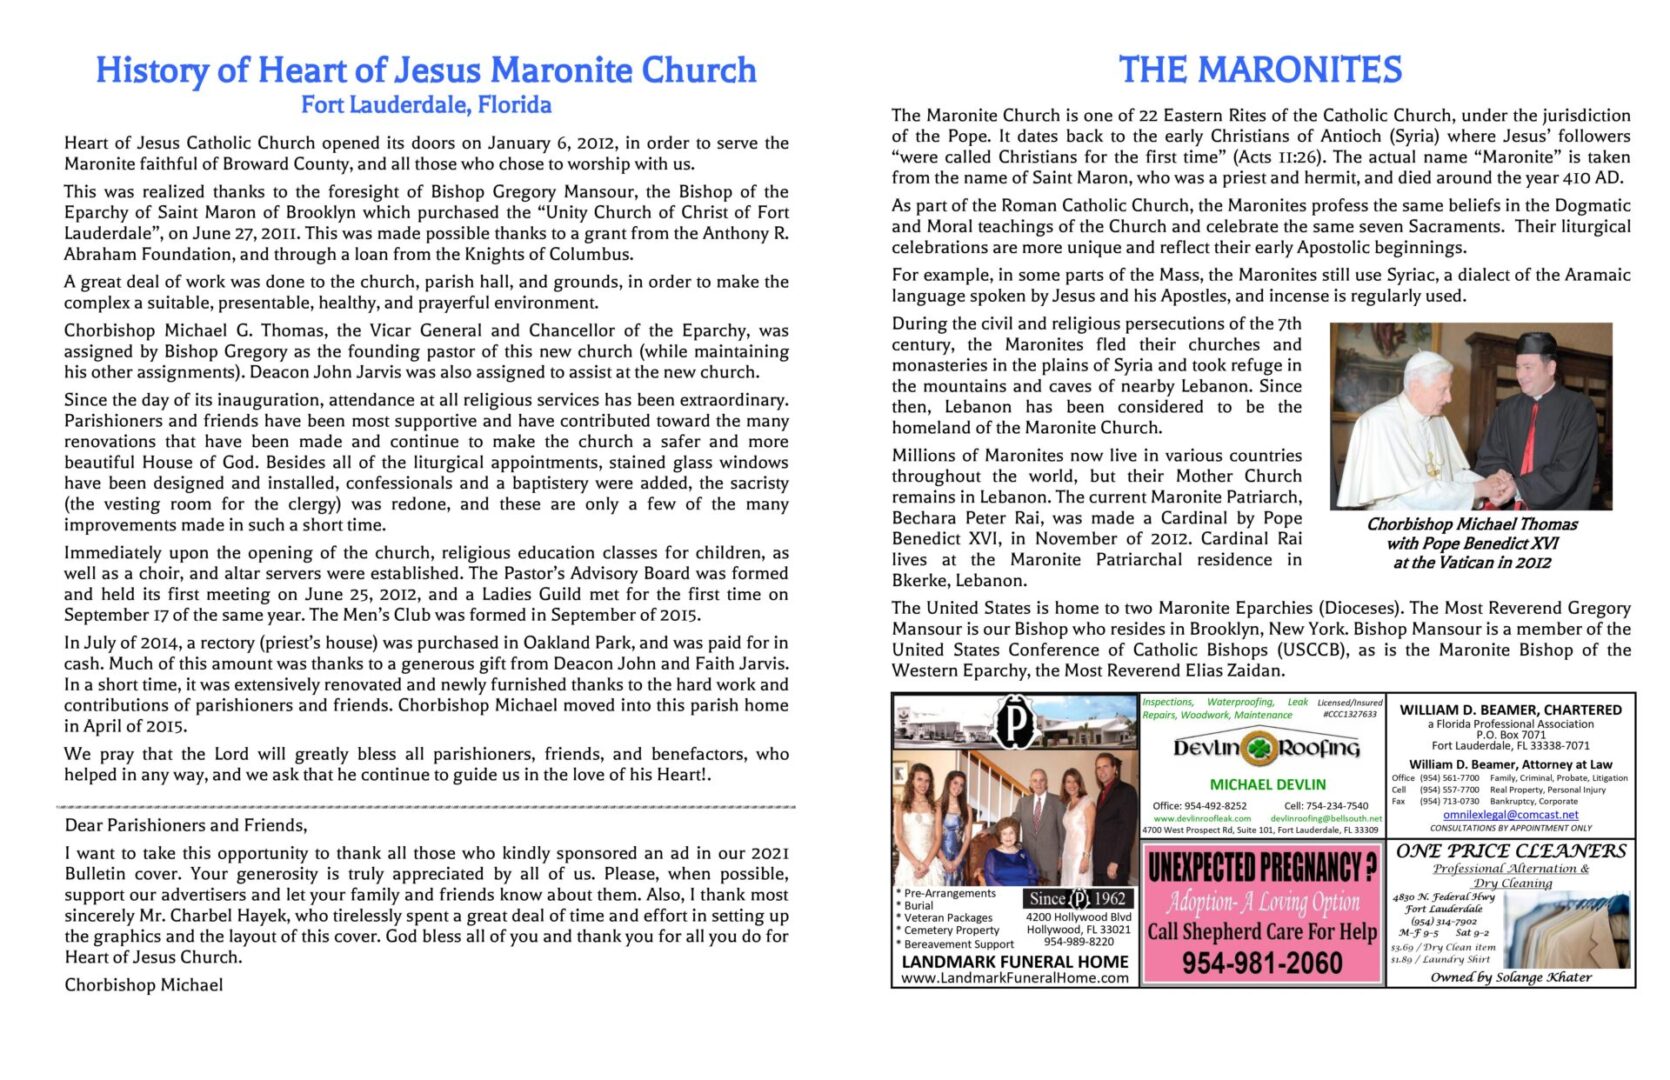 A flyer containing the Heart of Jesus Catholic Church Maronite Rite’s history